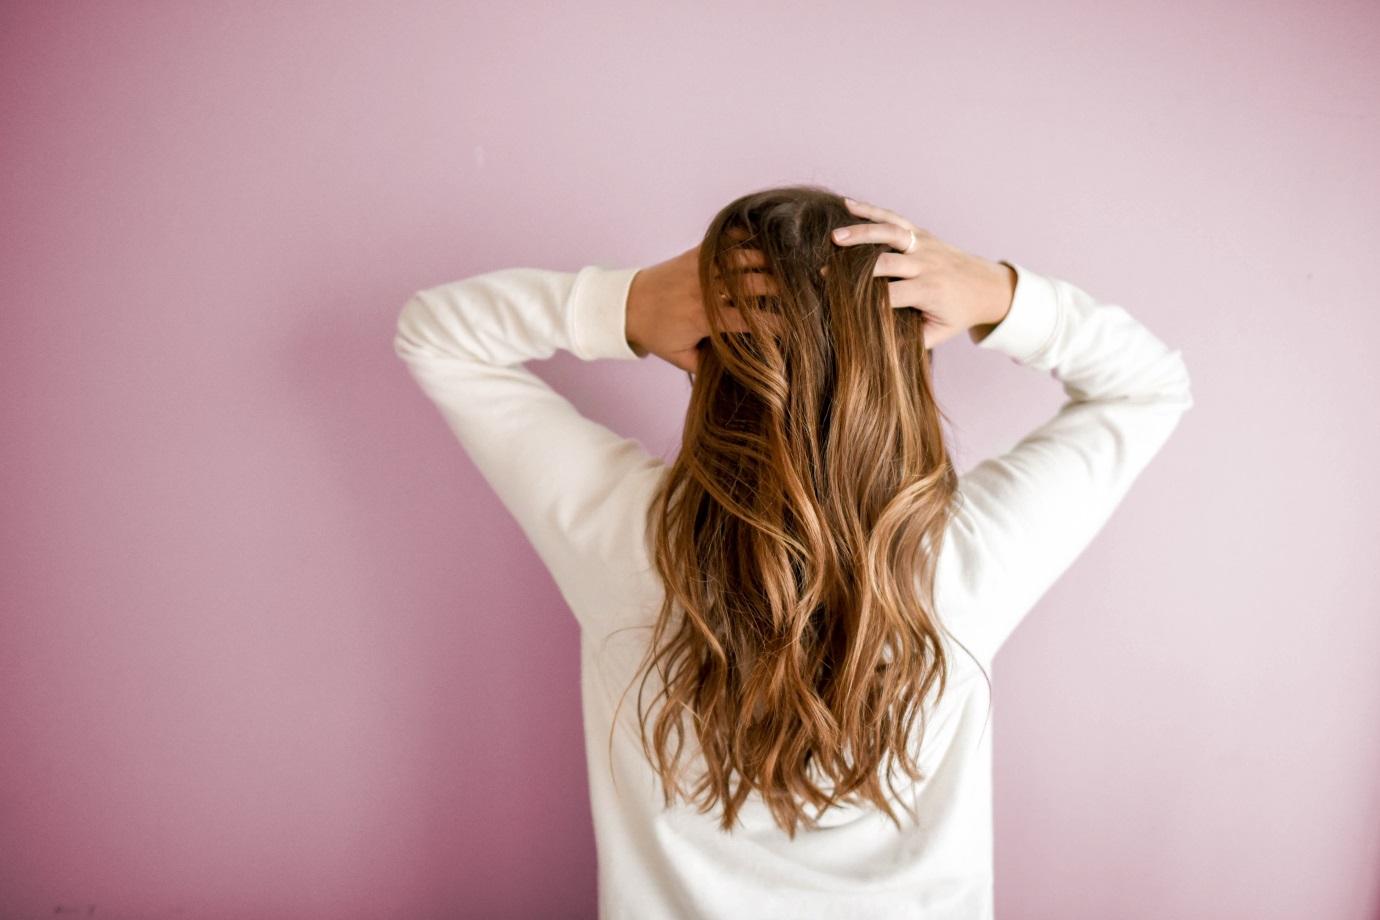 The Best List of Medicated shampoos to Get Rid of Dandruff